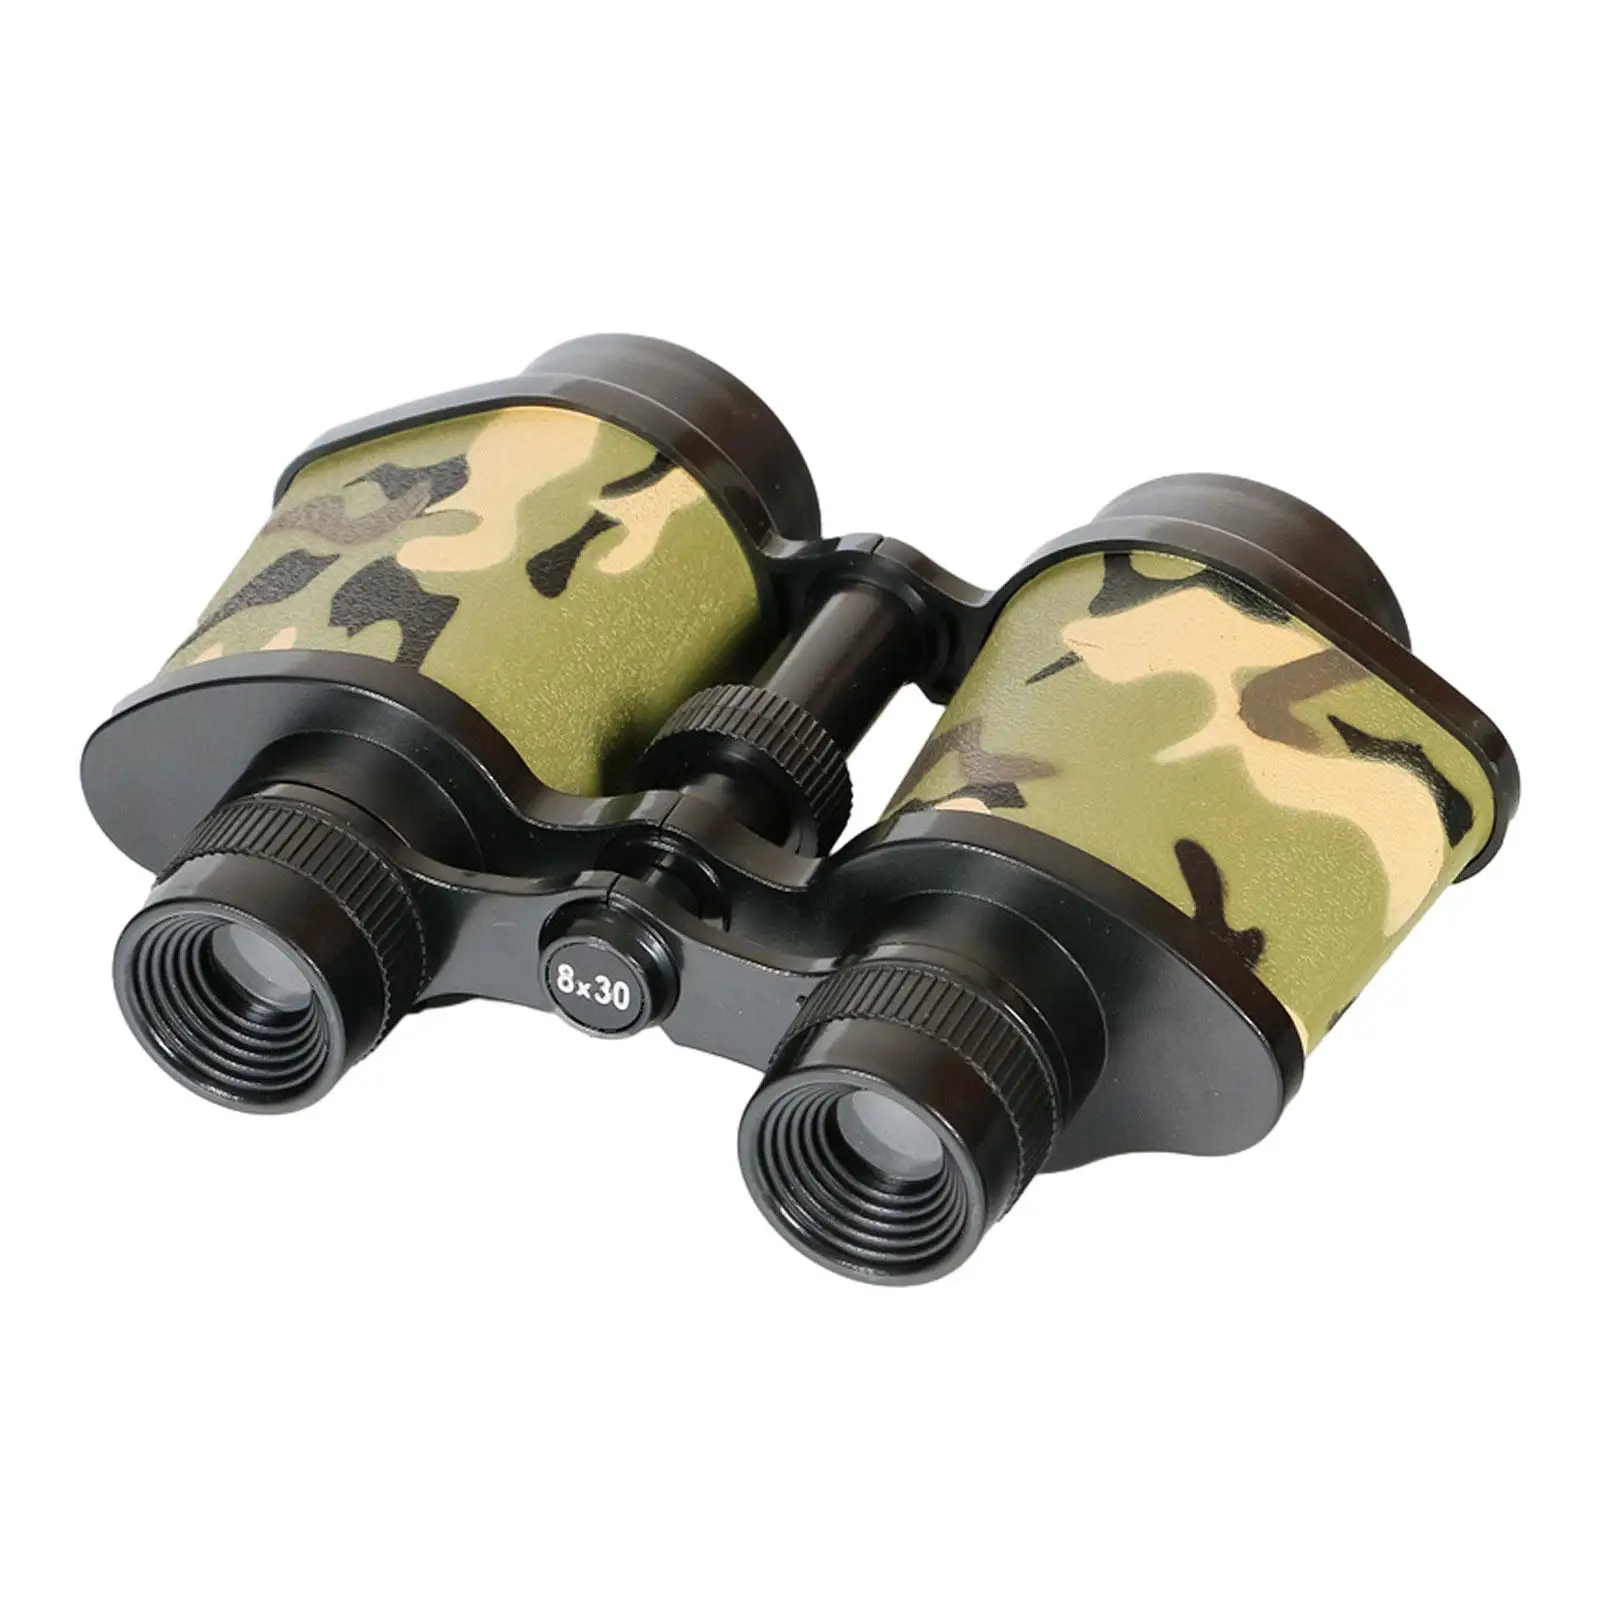 Kids Binoculars 8x30 with Lanyard Bird Watching Children Magnification Toy for Birthday Party Favors Science Hiking Sports